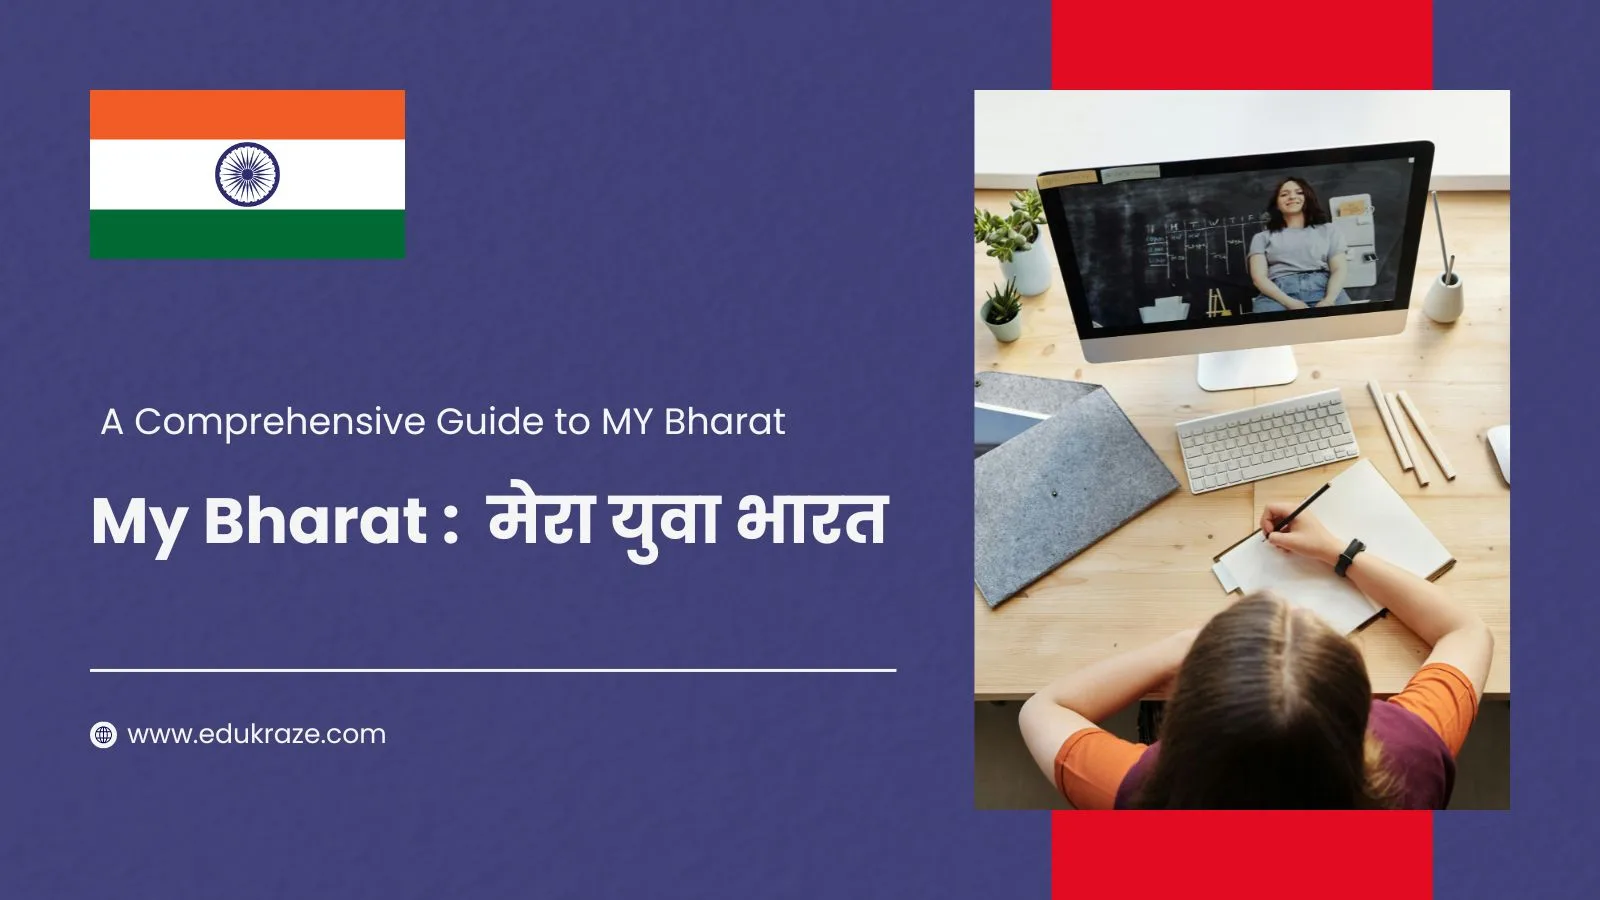 MY Bharat: मेरा युवा भारत Gateway to Experiential Learning, Skill Development, and Social Impact